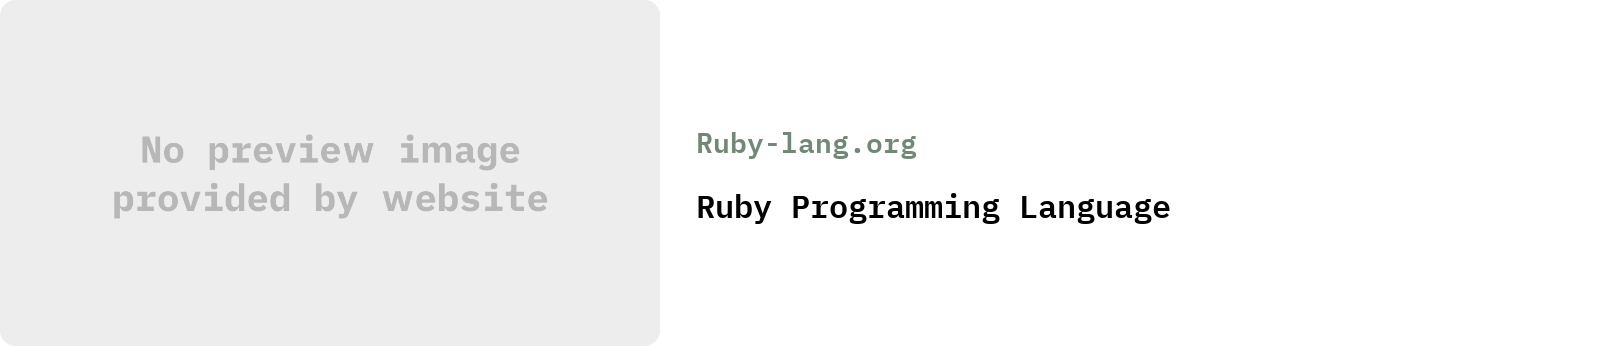 From Ruby-lang.org: Ruby Programming Language | 